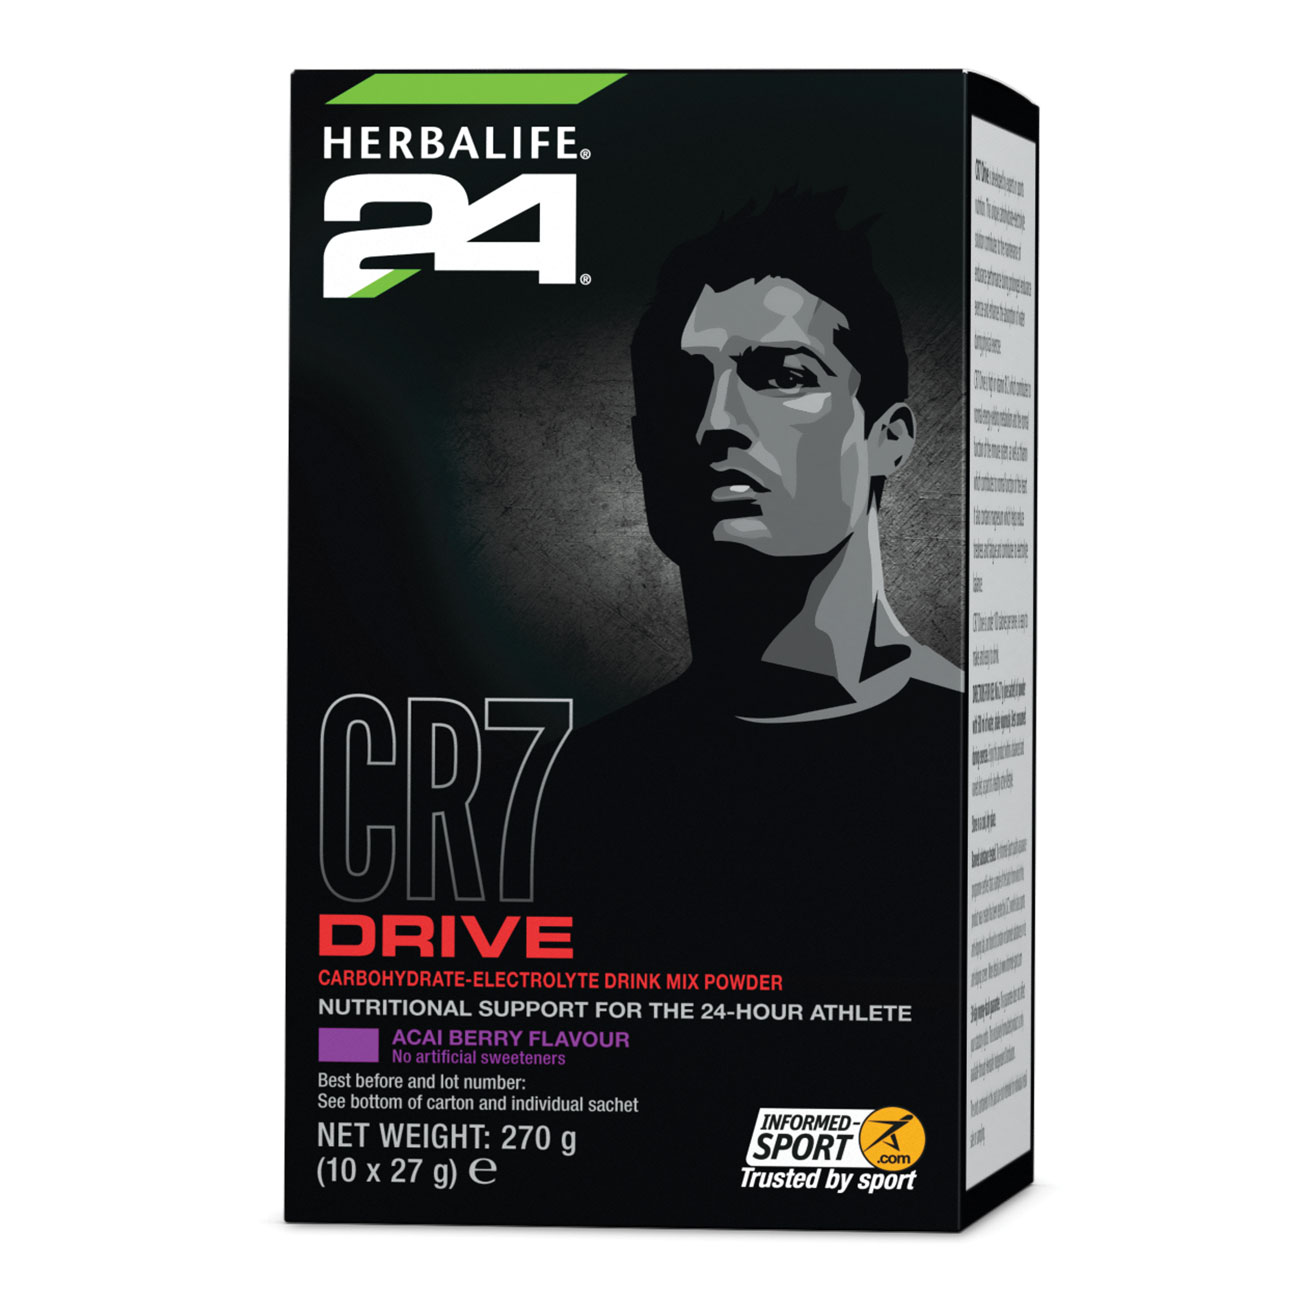 Herbalife24® CR7 Drive Sports Drink Acai Berry product shot.